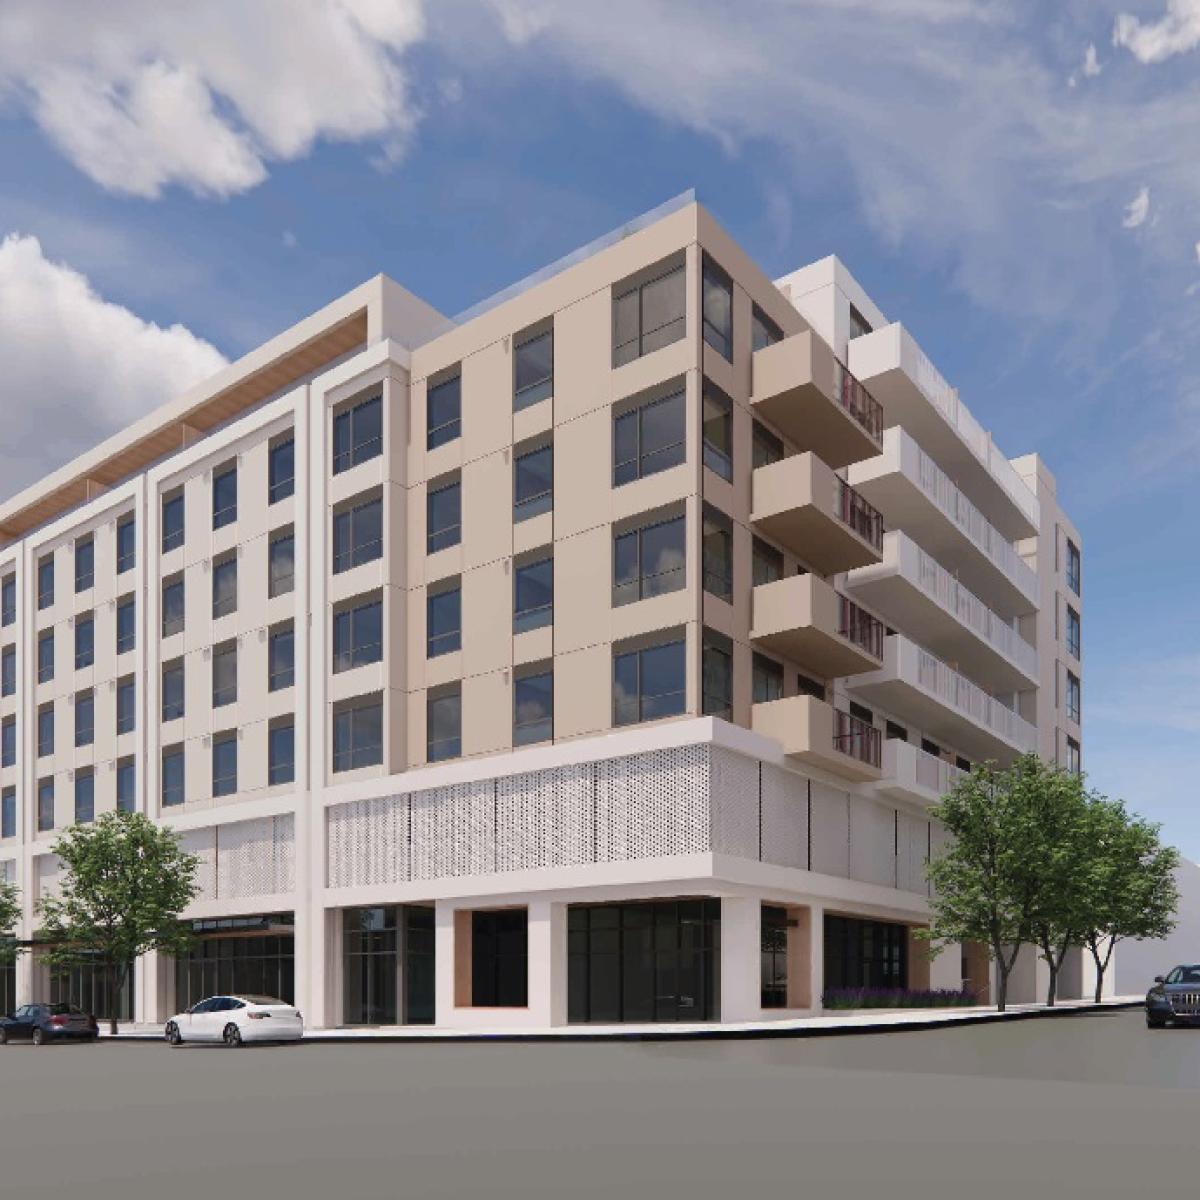 Mixed-use project takes a step forward at 11905 Wilshire in 